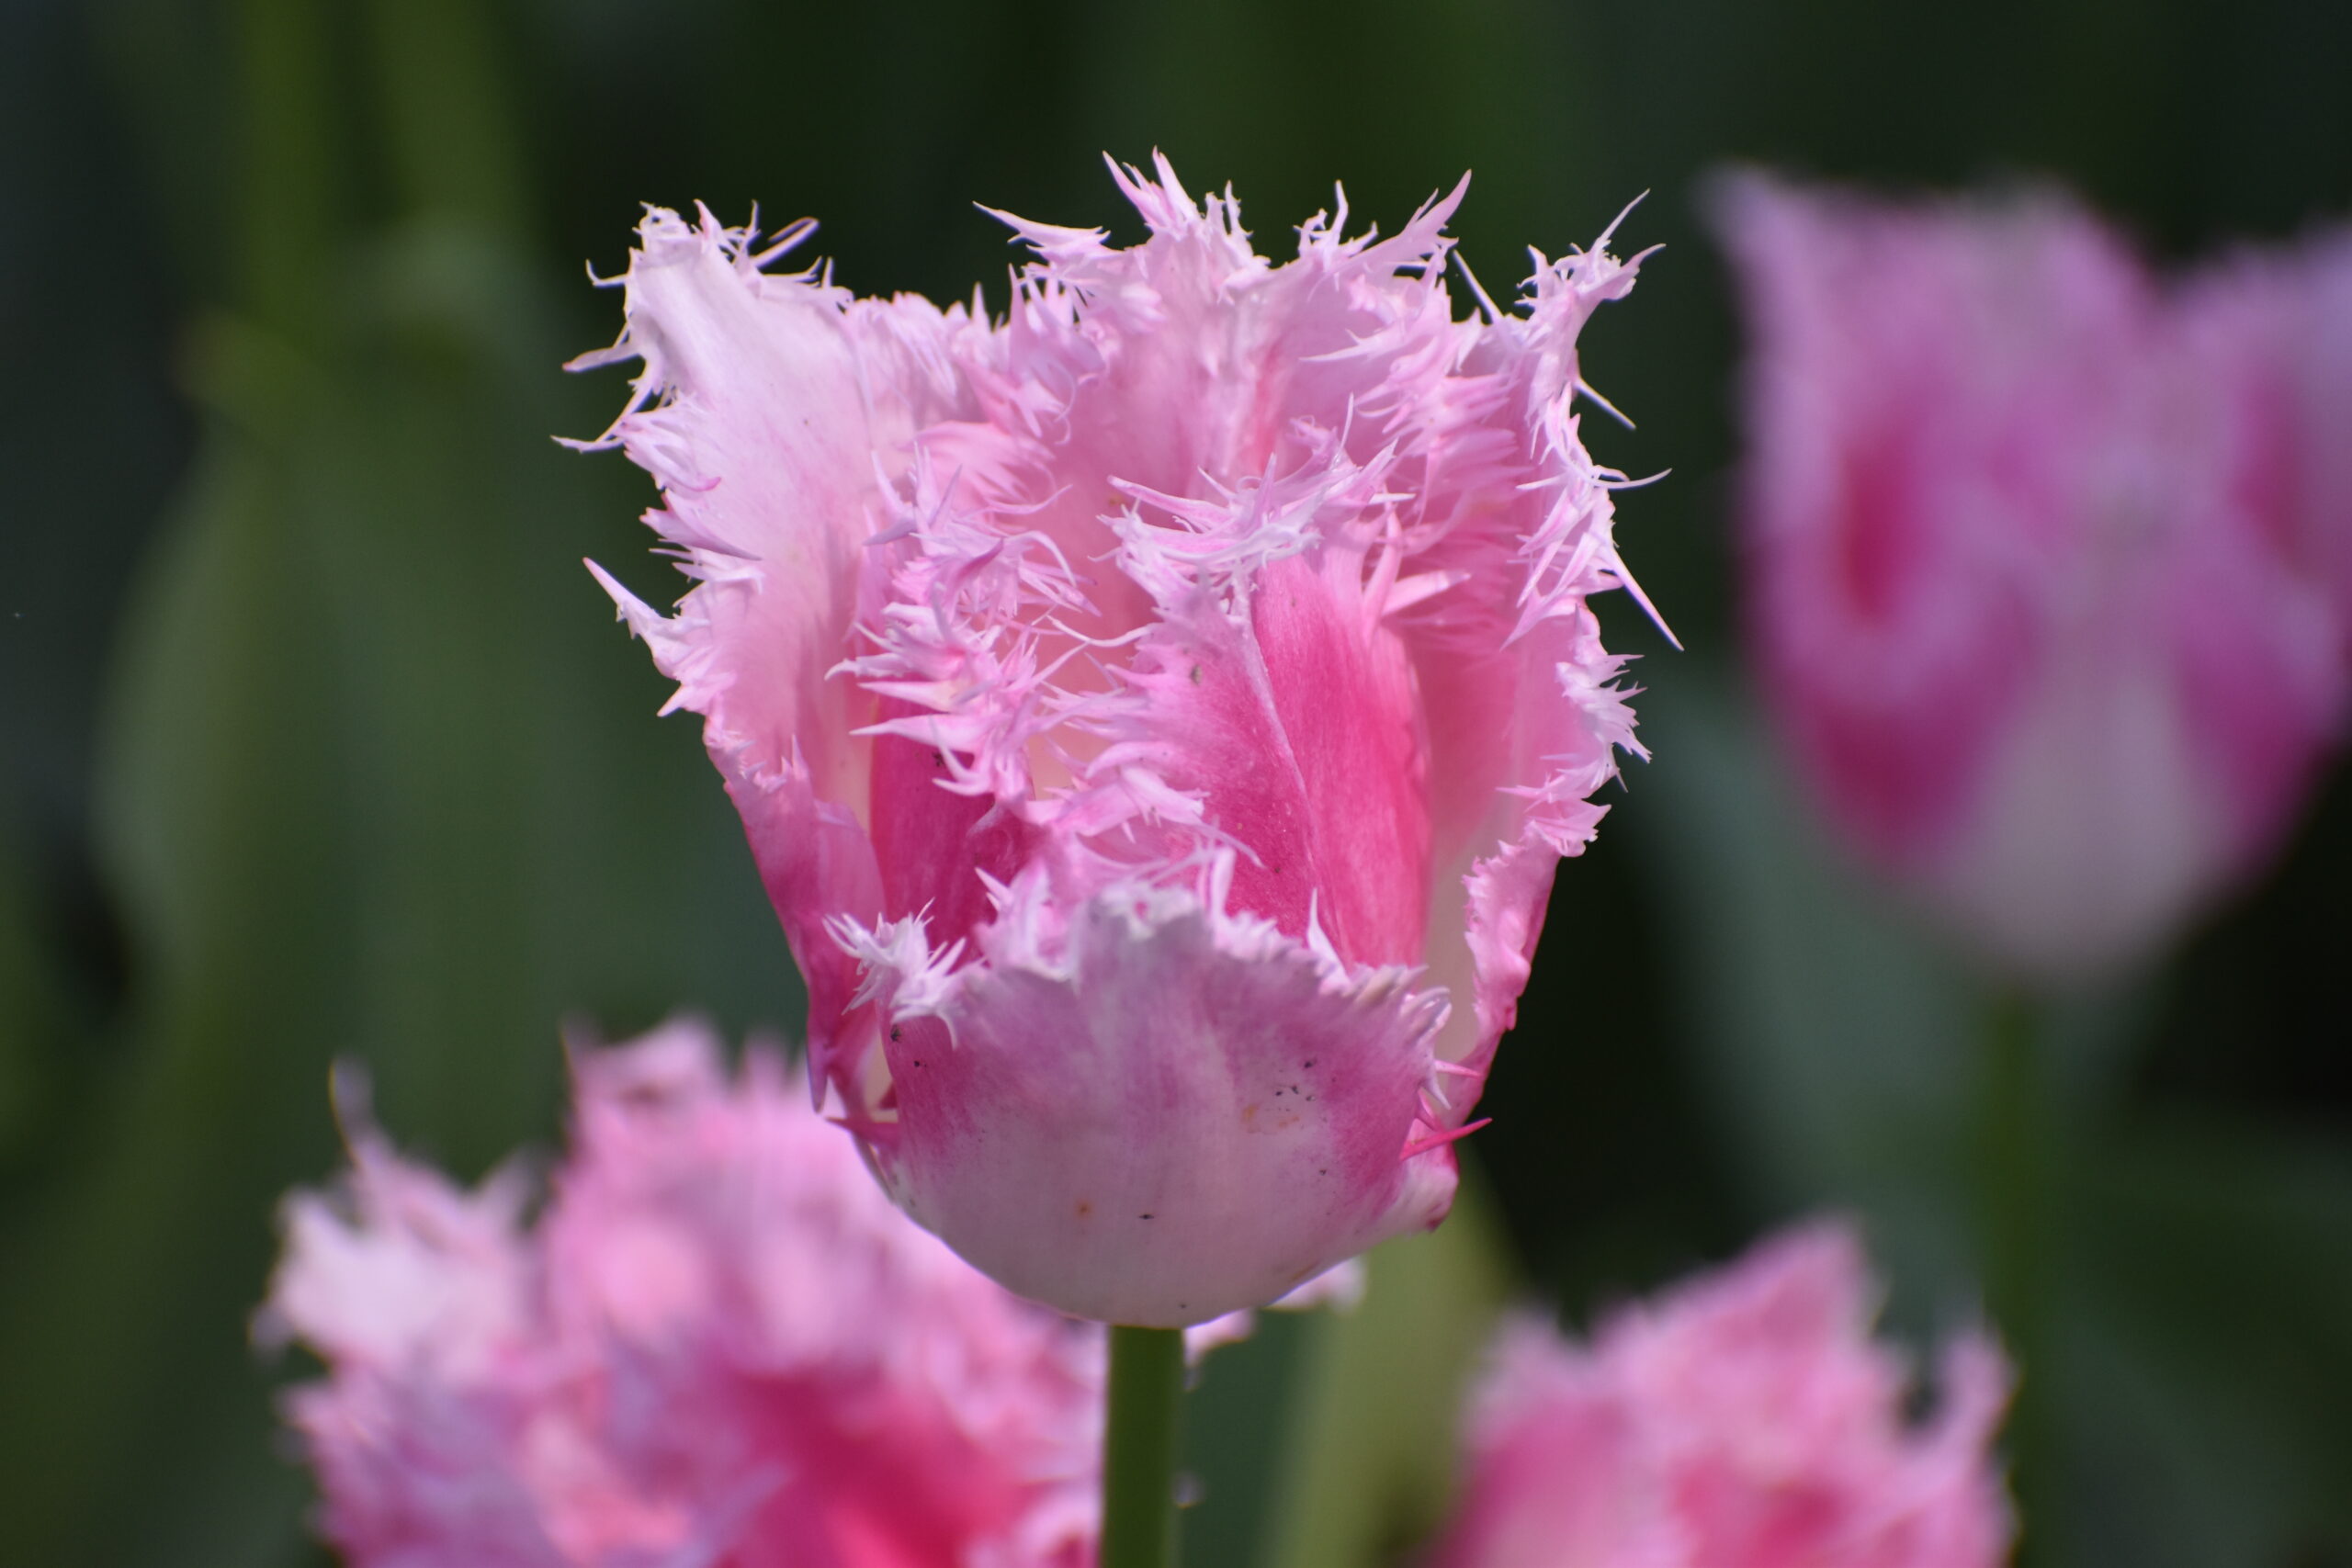 Closeup of a pink flower with fringed petals